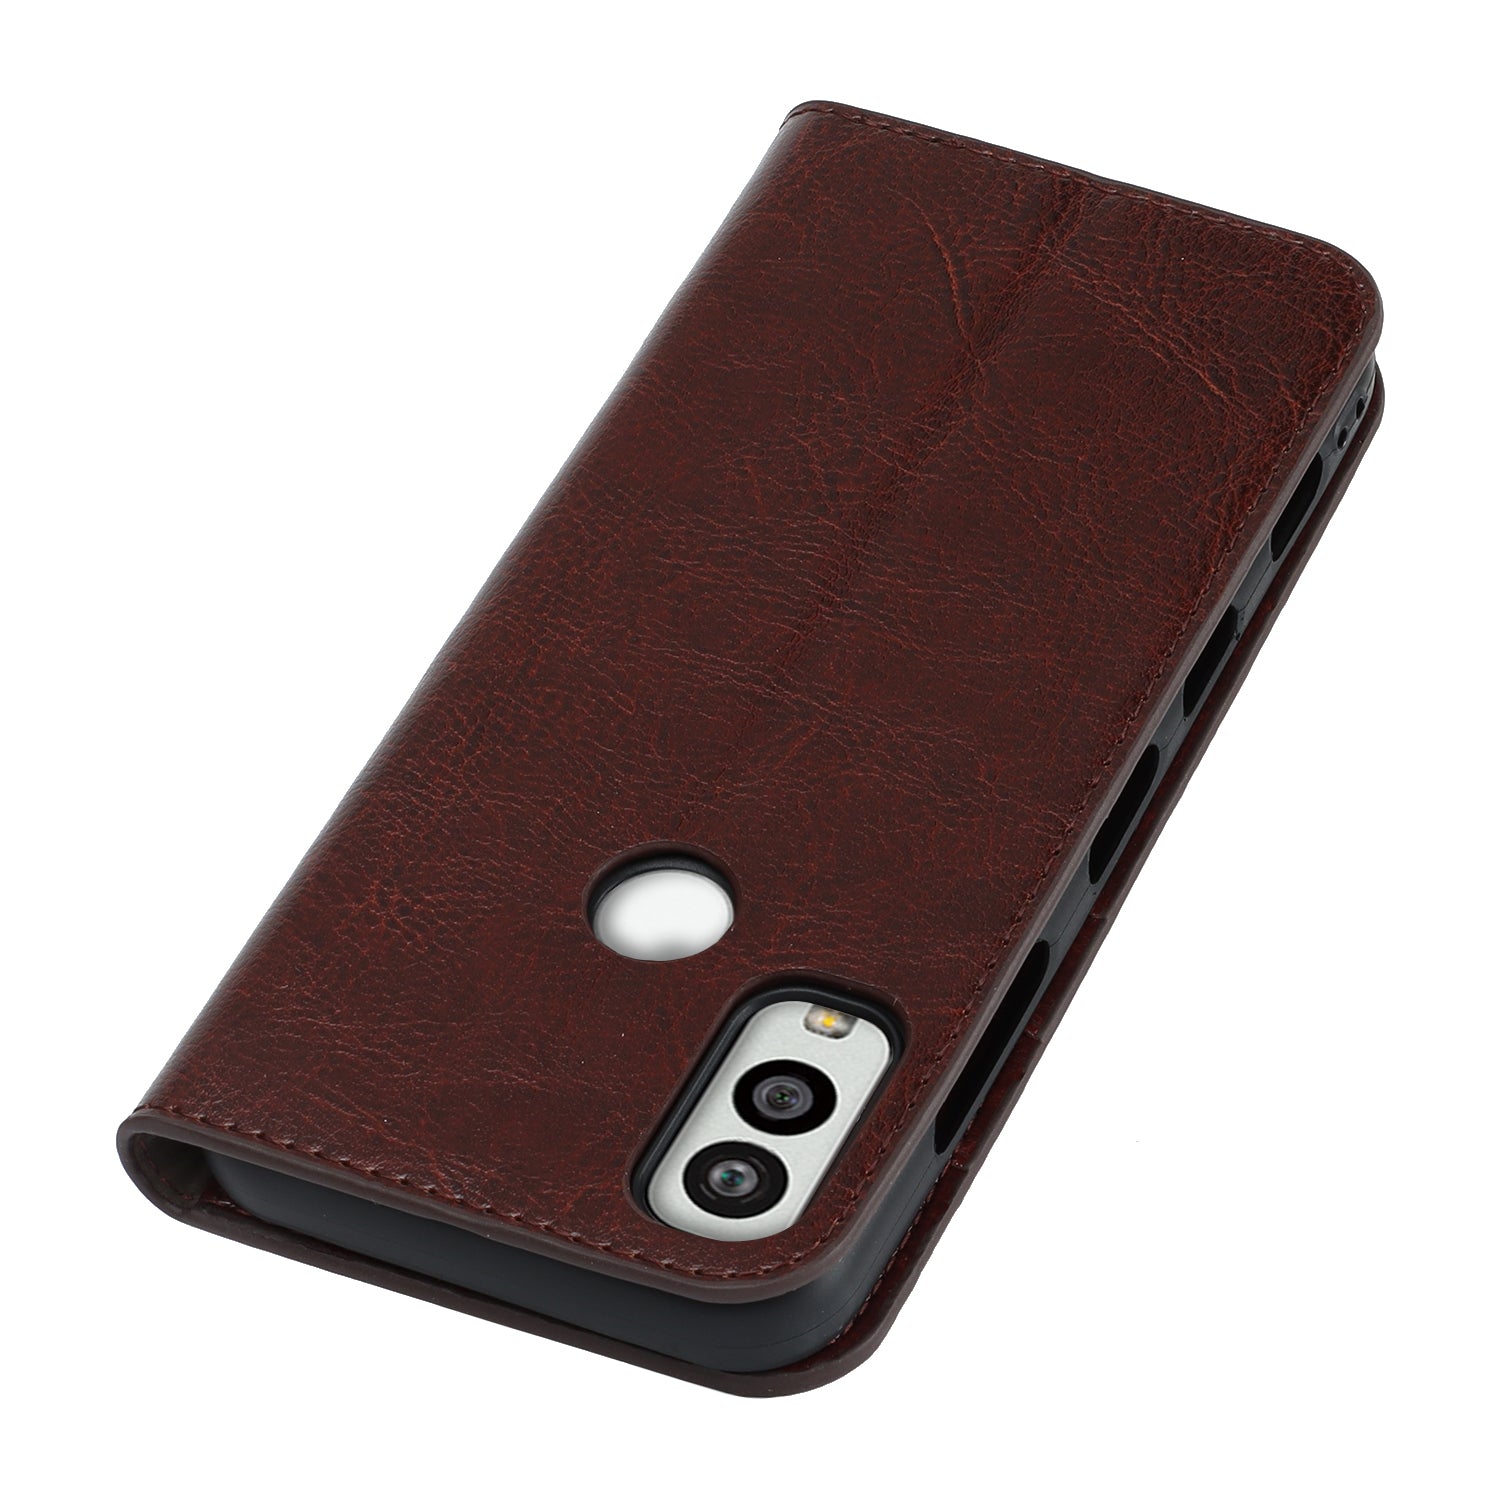 Uniqkart for Kyocera Android One S10 / One S9 Fall Proof Phone Case Crazy Horse Texture Genuine Cow Leather Stand Wallet Cover - Dark Brown